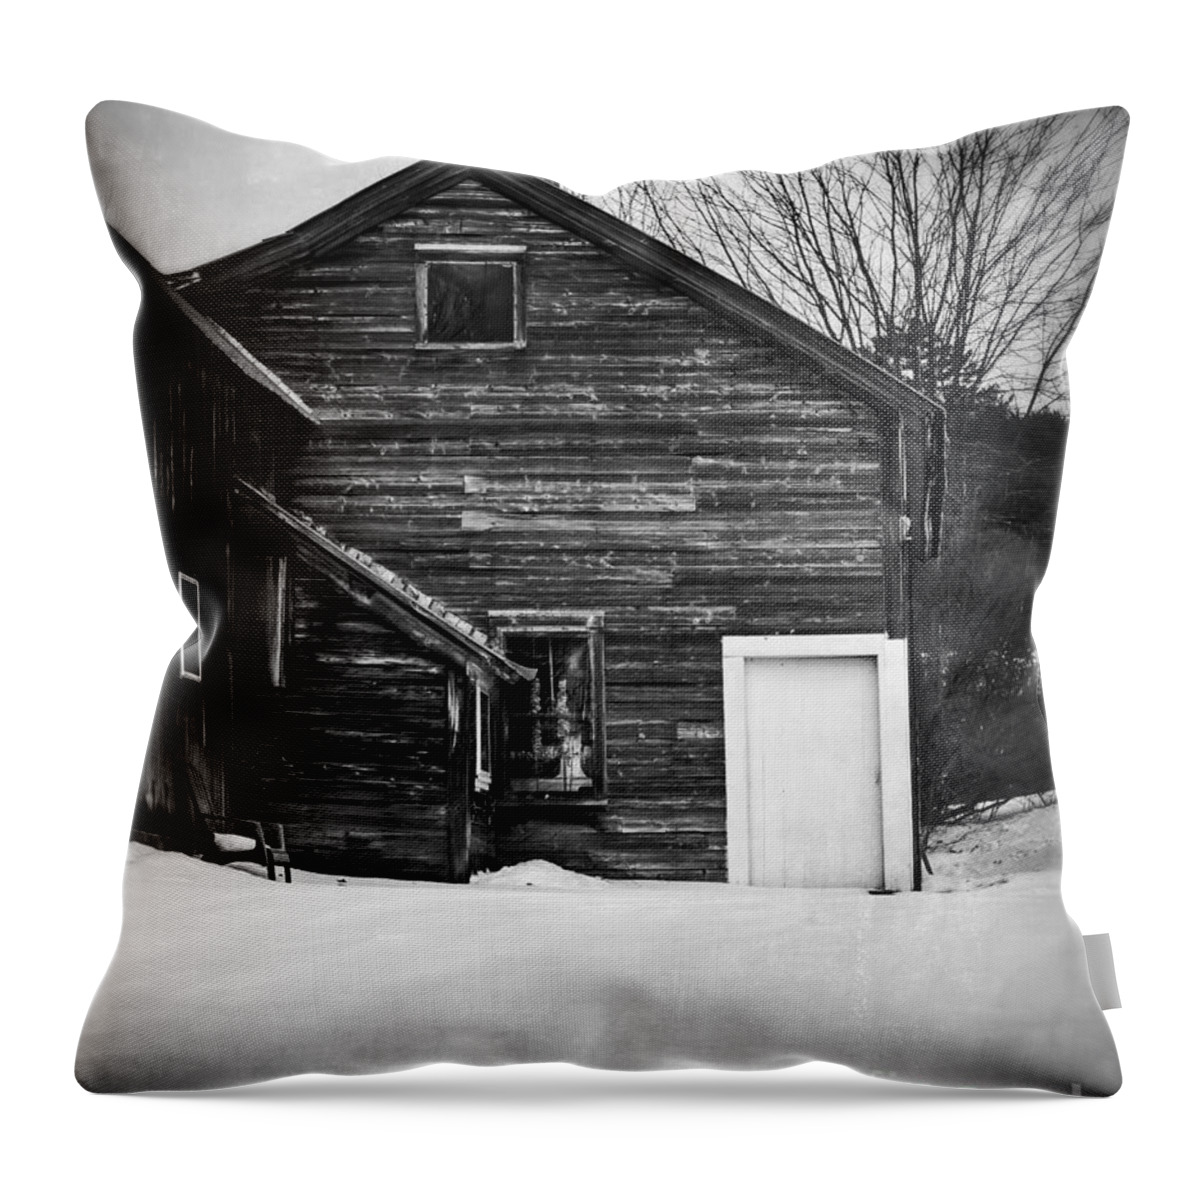 Snow Throw Pillow featuring the photograph Haunted Old House by Edward Fielding